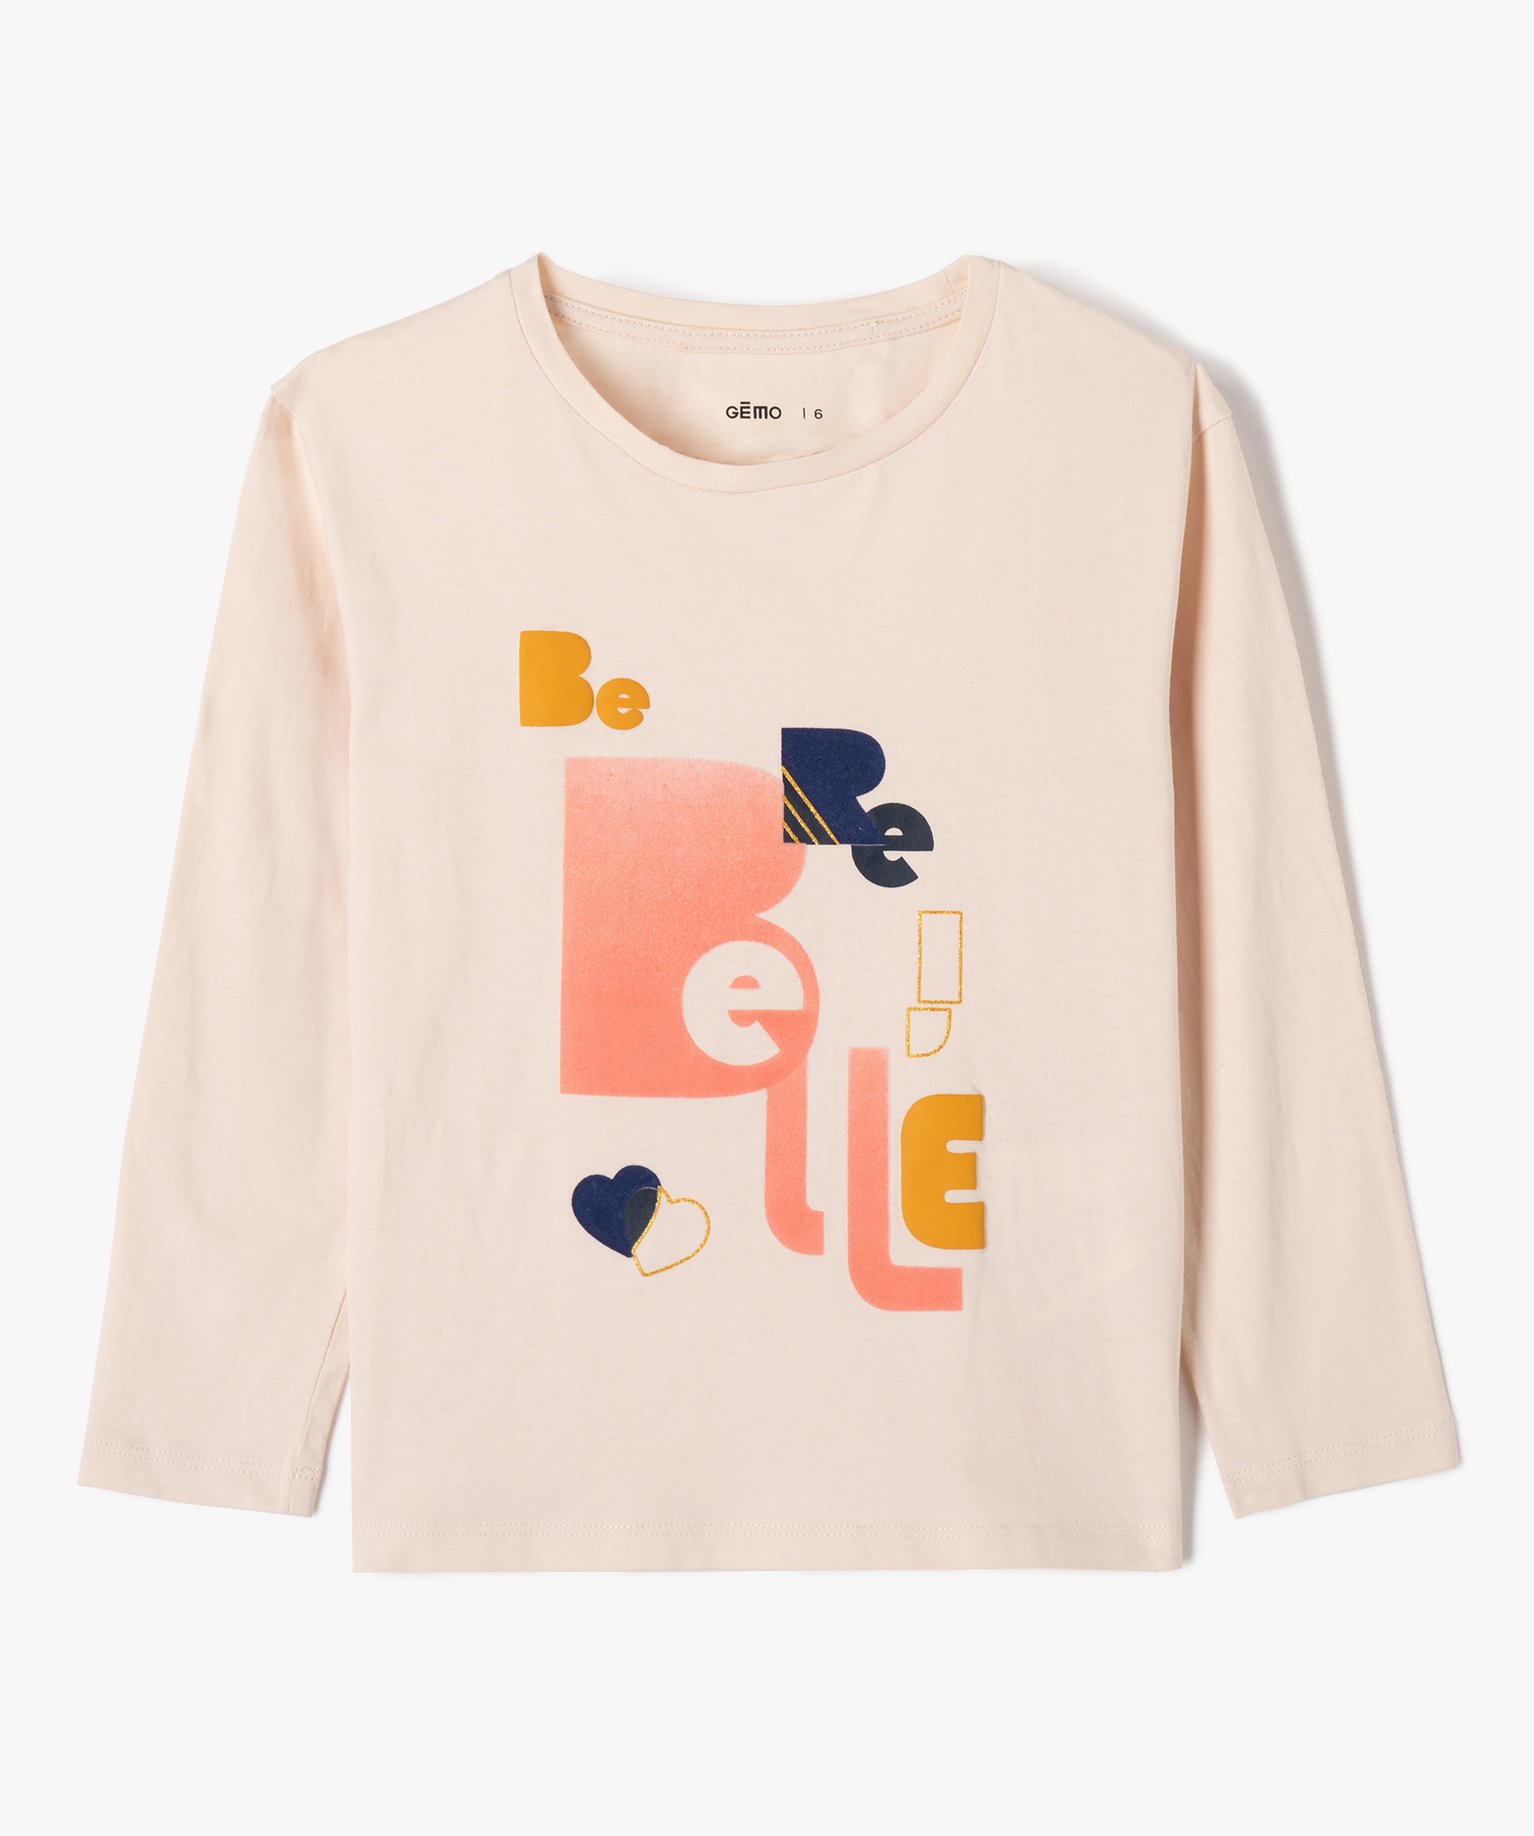 tee-shirt fille a manches longues imprime beige tee-shirts